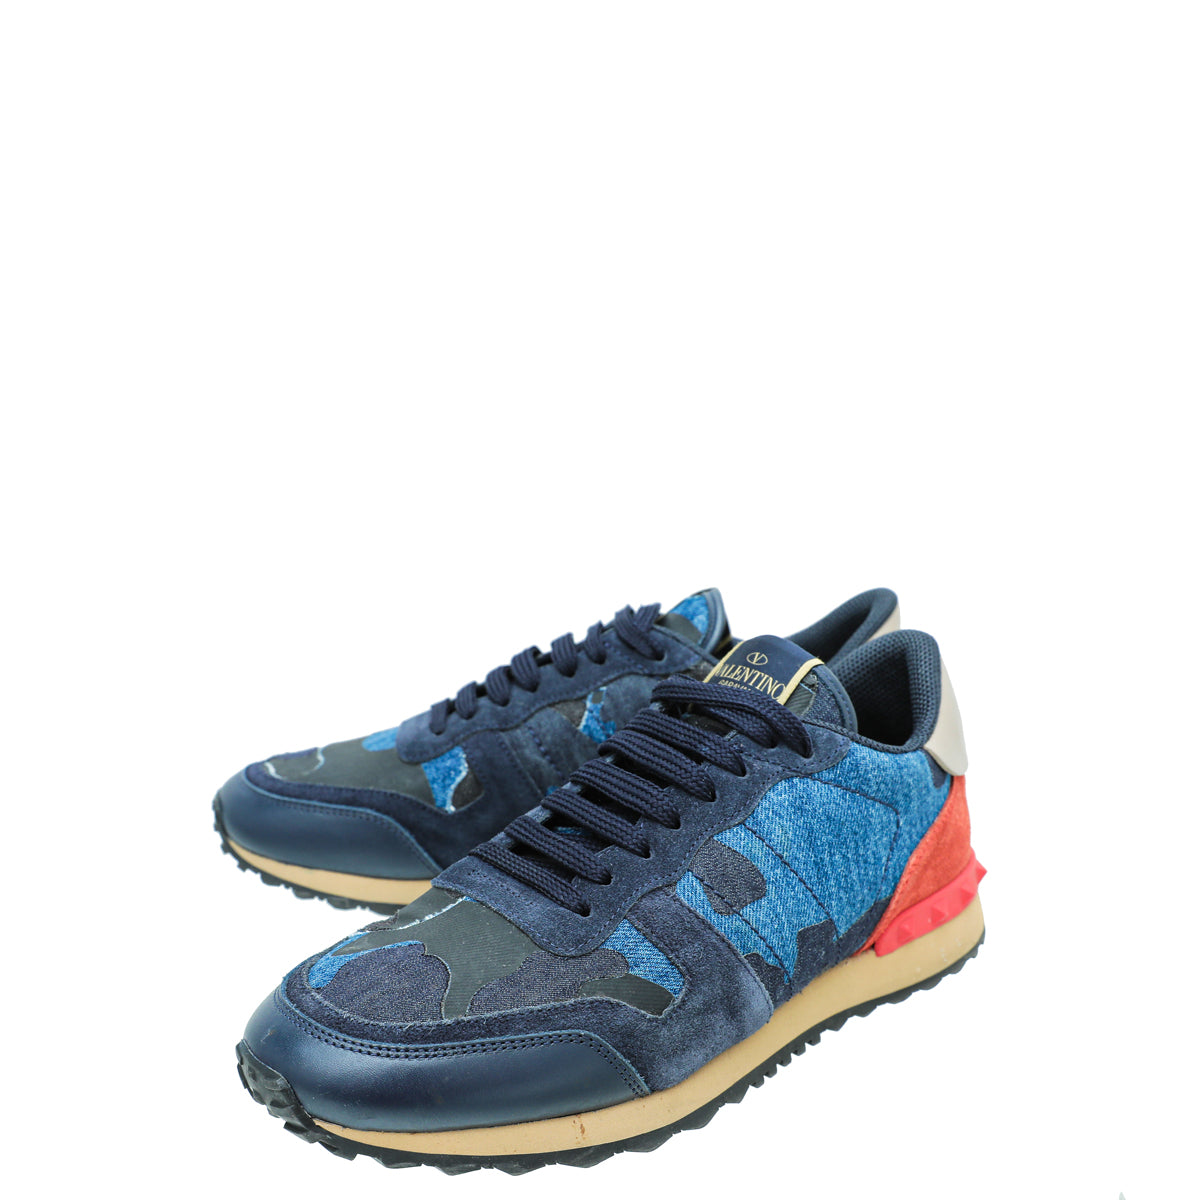 Valentino Blue Multicolor Camouflage Rockrunner Sneakers 41